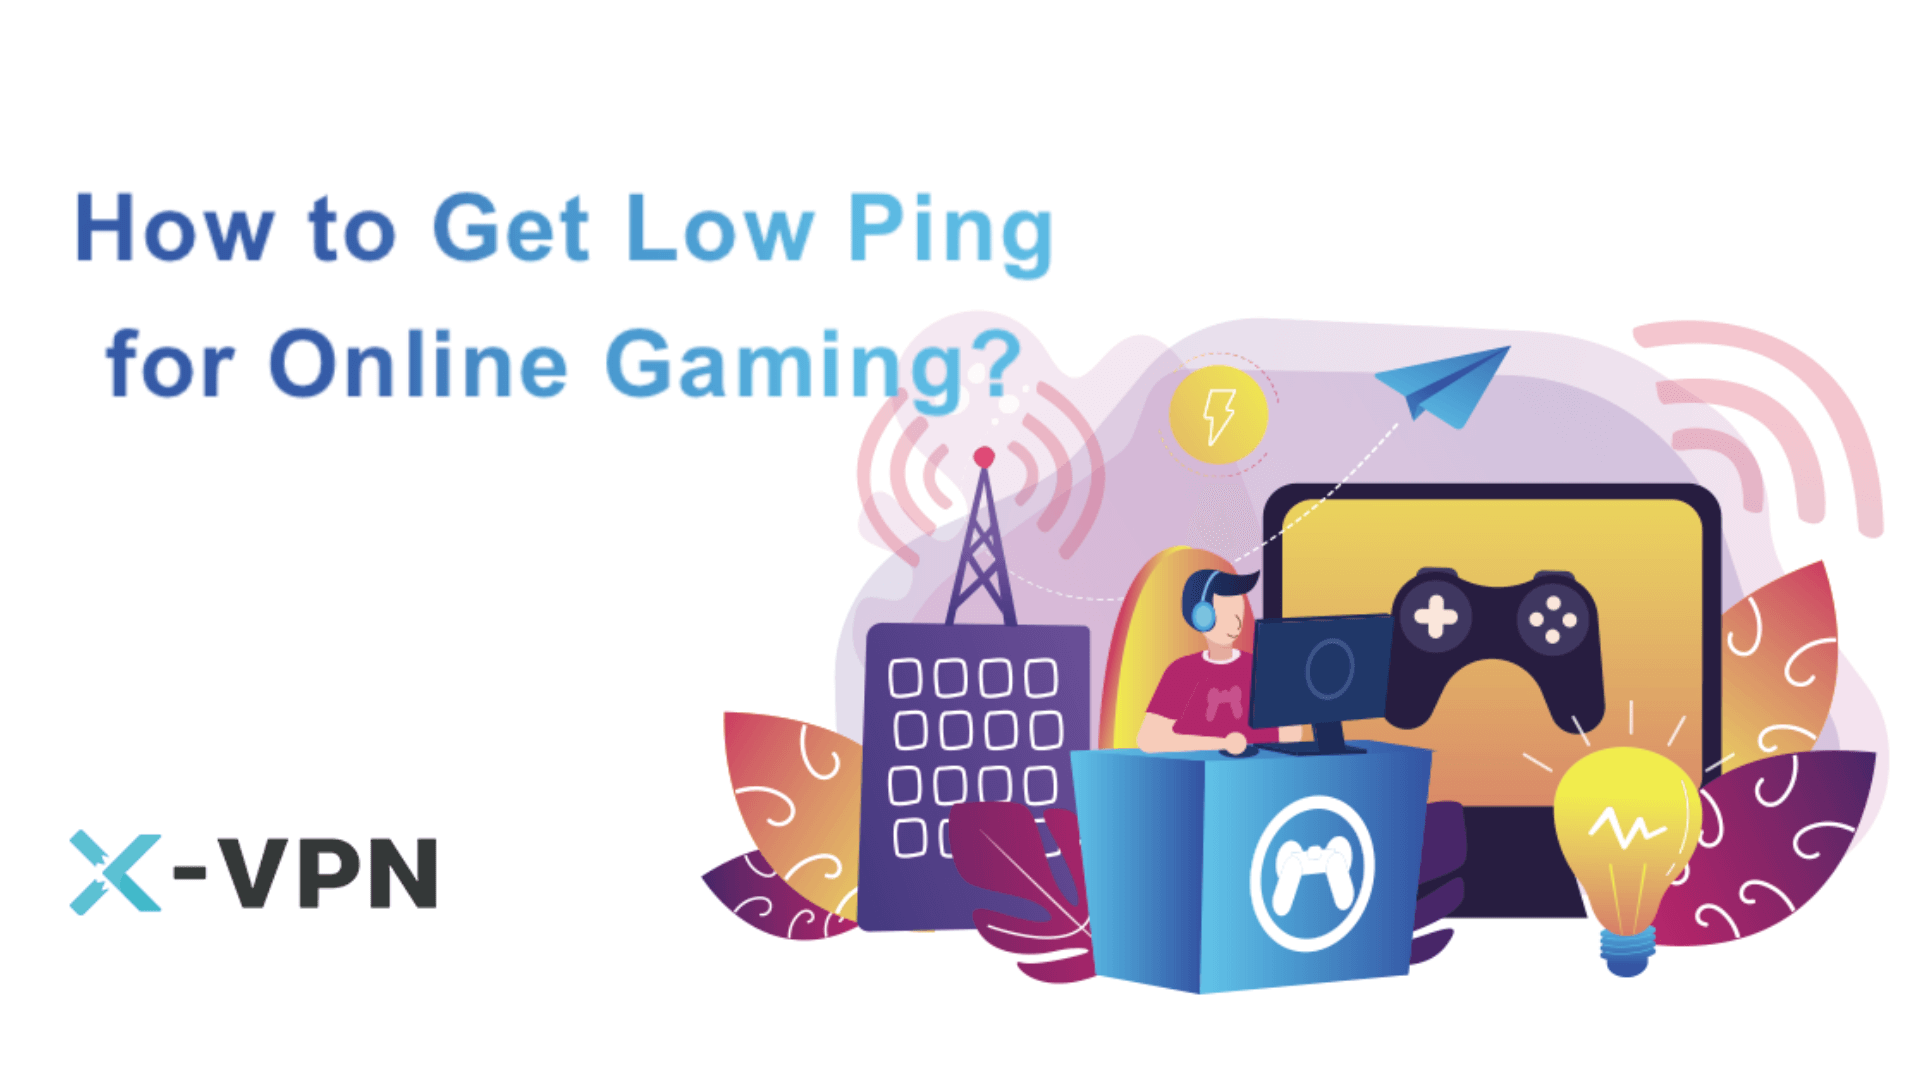 How to reduce ping for online gaming